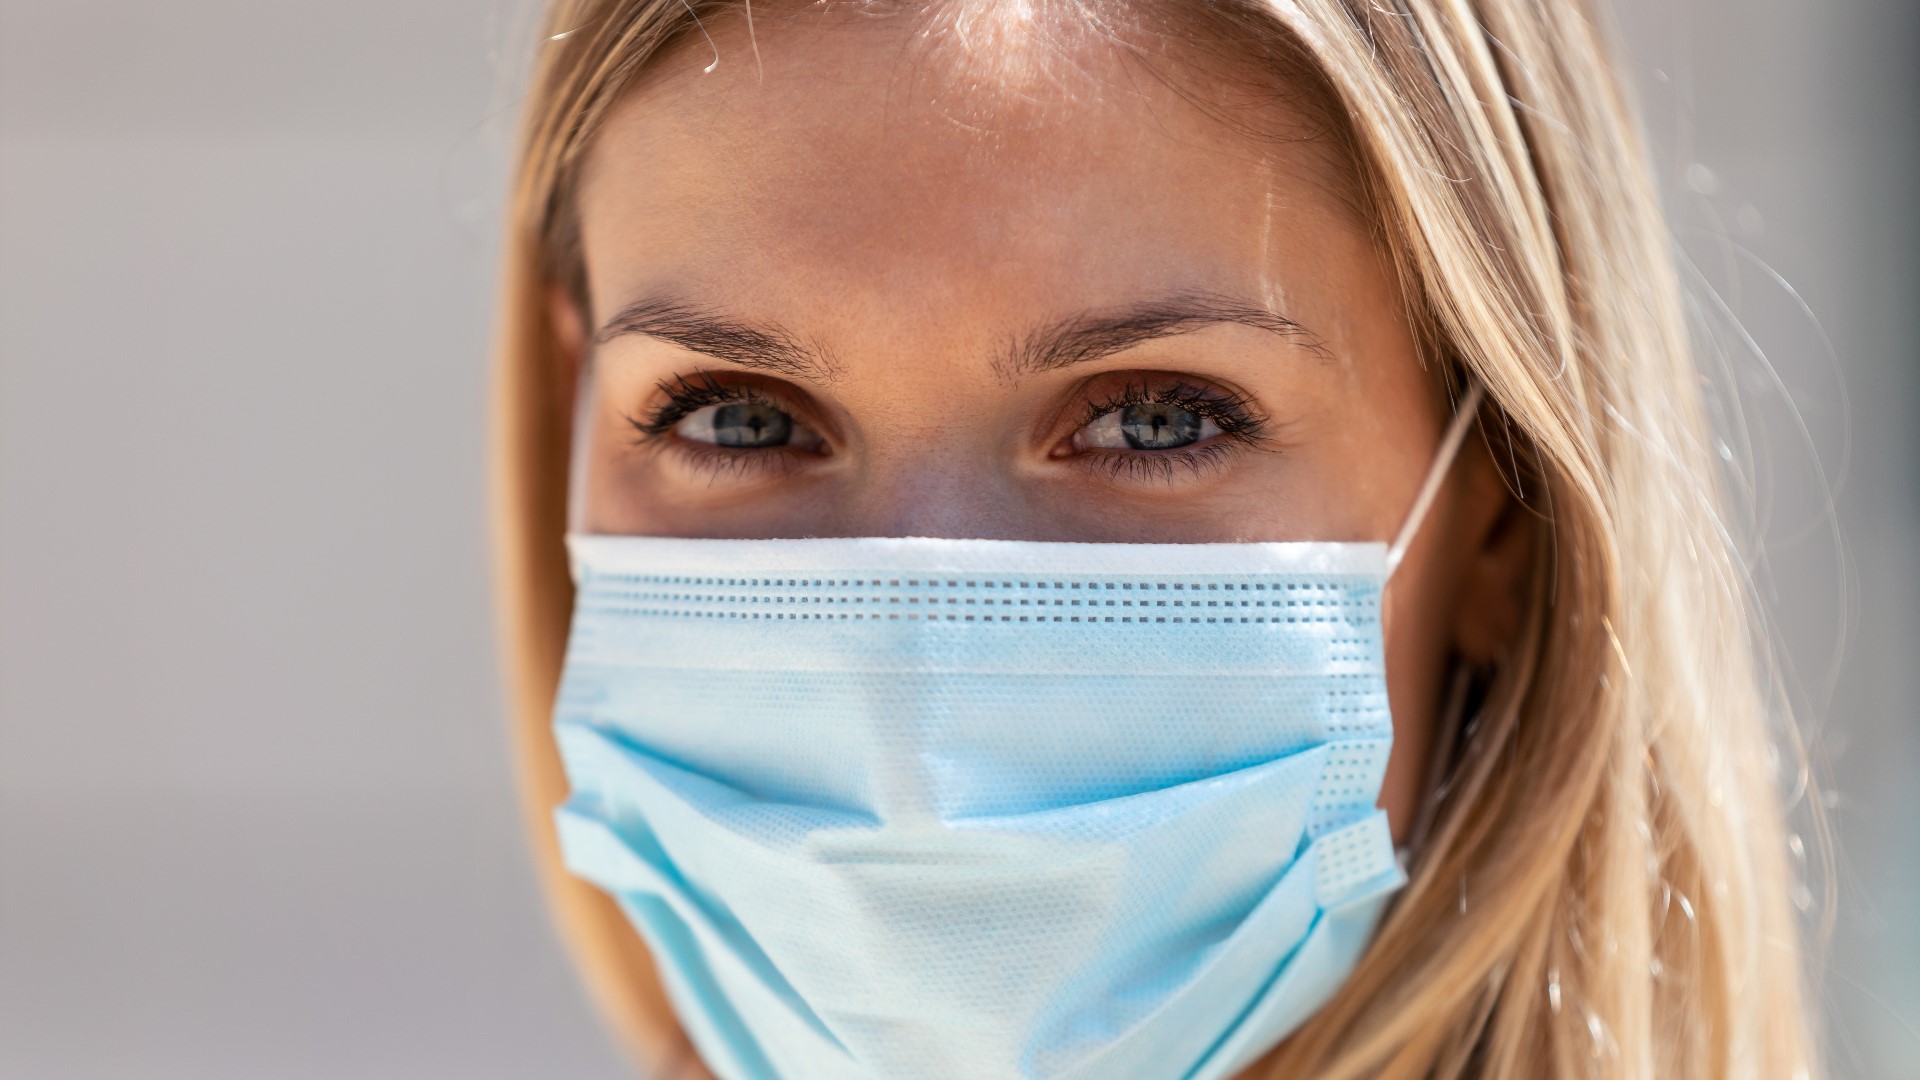 There's a lot of confusion around the CDC's new recommendation about wearing masks indoors.